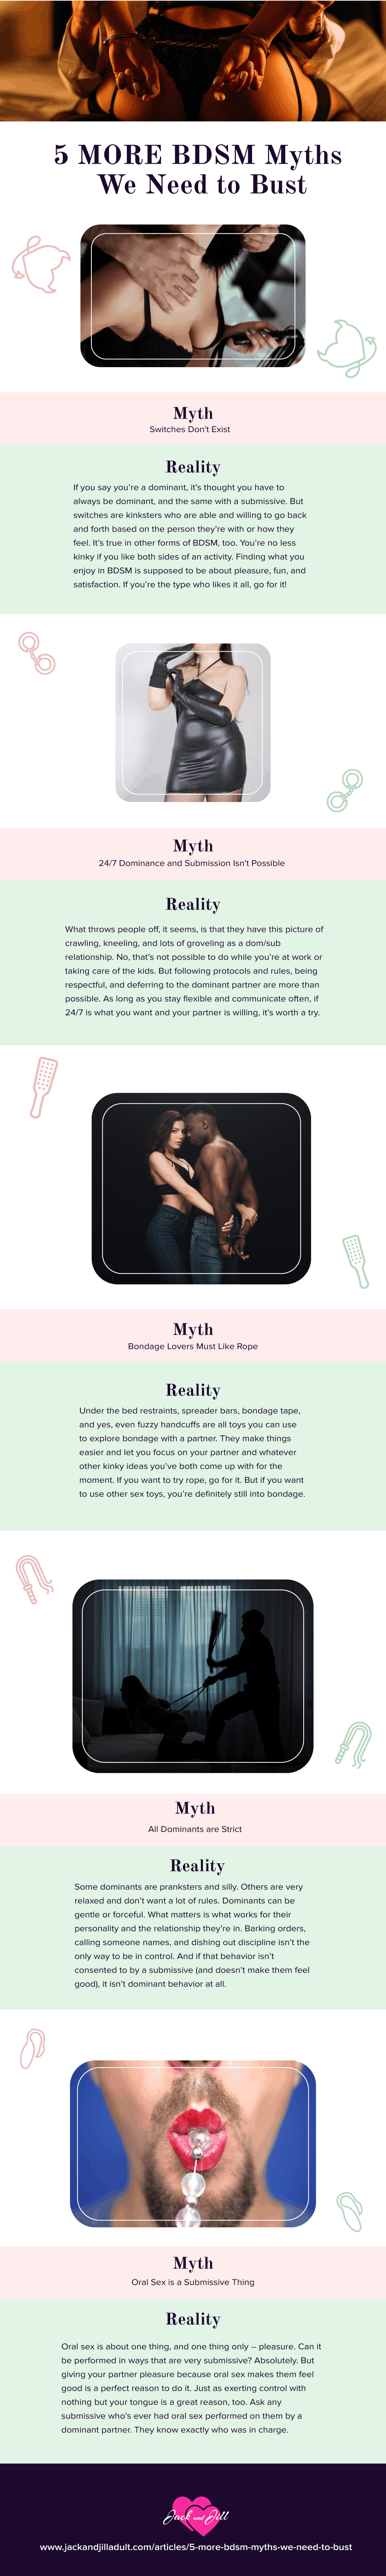 Infographic for 5 More BDSM Myths We Need to Bust